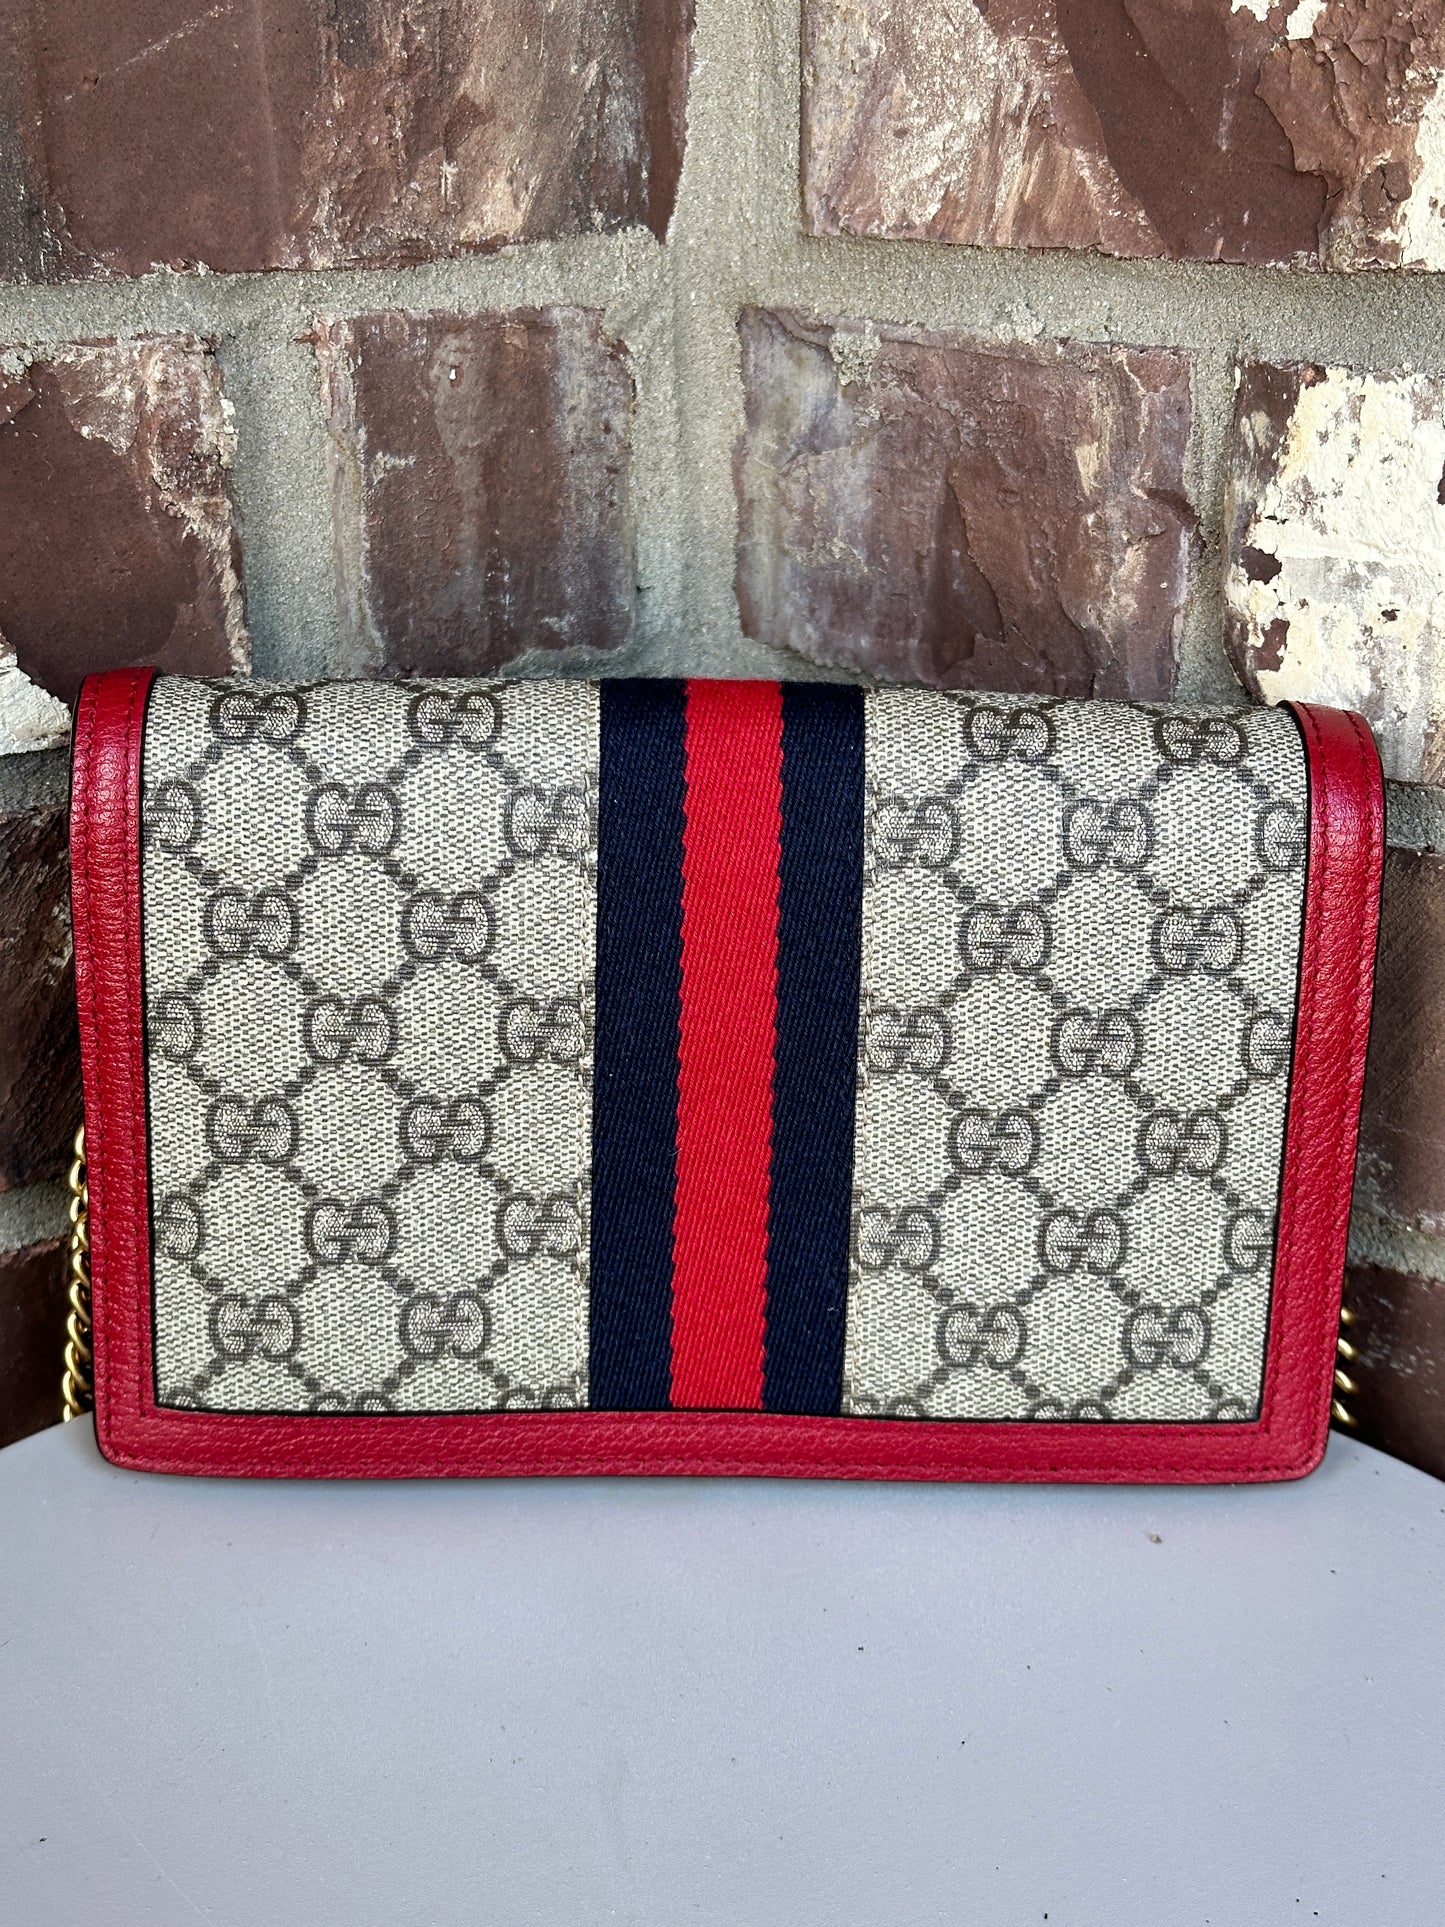 Gucci Queen Margaret Chain Wallet GG Coated Canvas Mini